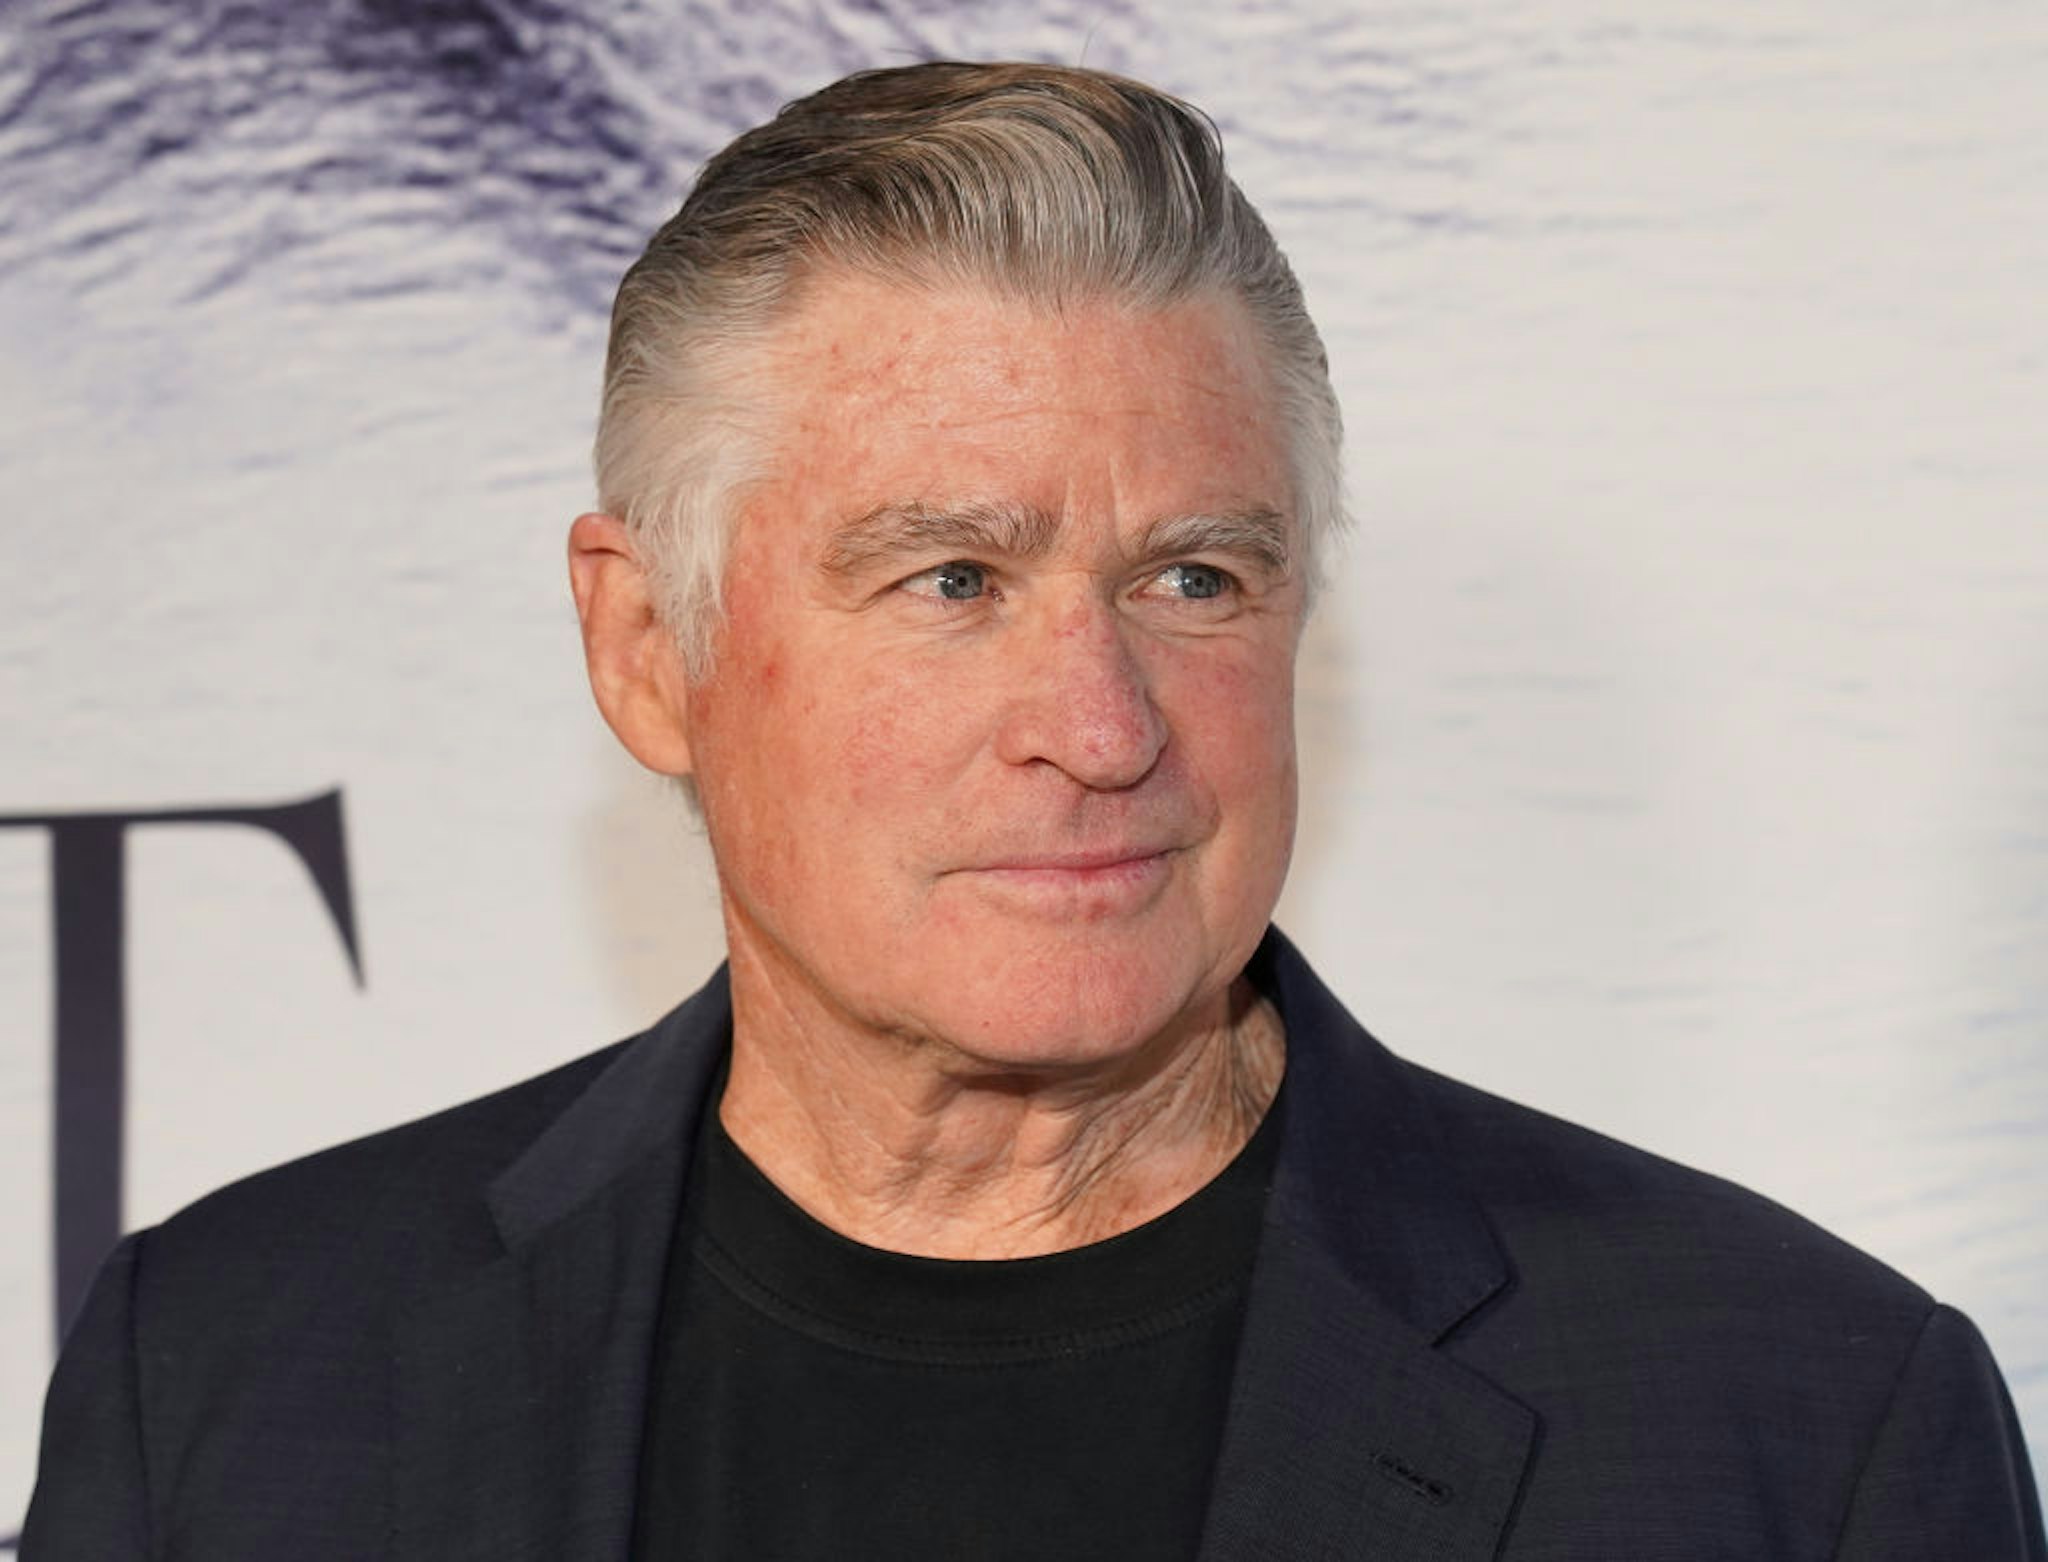 HOLLYWOOD, CALIFORNIA - OCTOBER 17: Treat Williams attends the premiere of P12 Films' "The Great Alaskan Race" at ArcLight Hollywood on October 17, 2019 in Hollywood, California. (Photo by Rachel Luna/Getty Images)